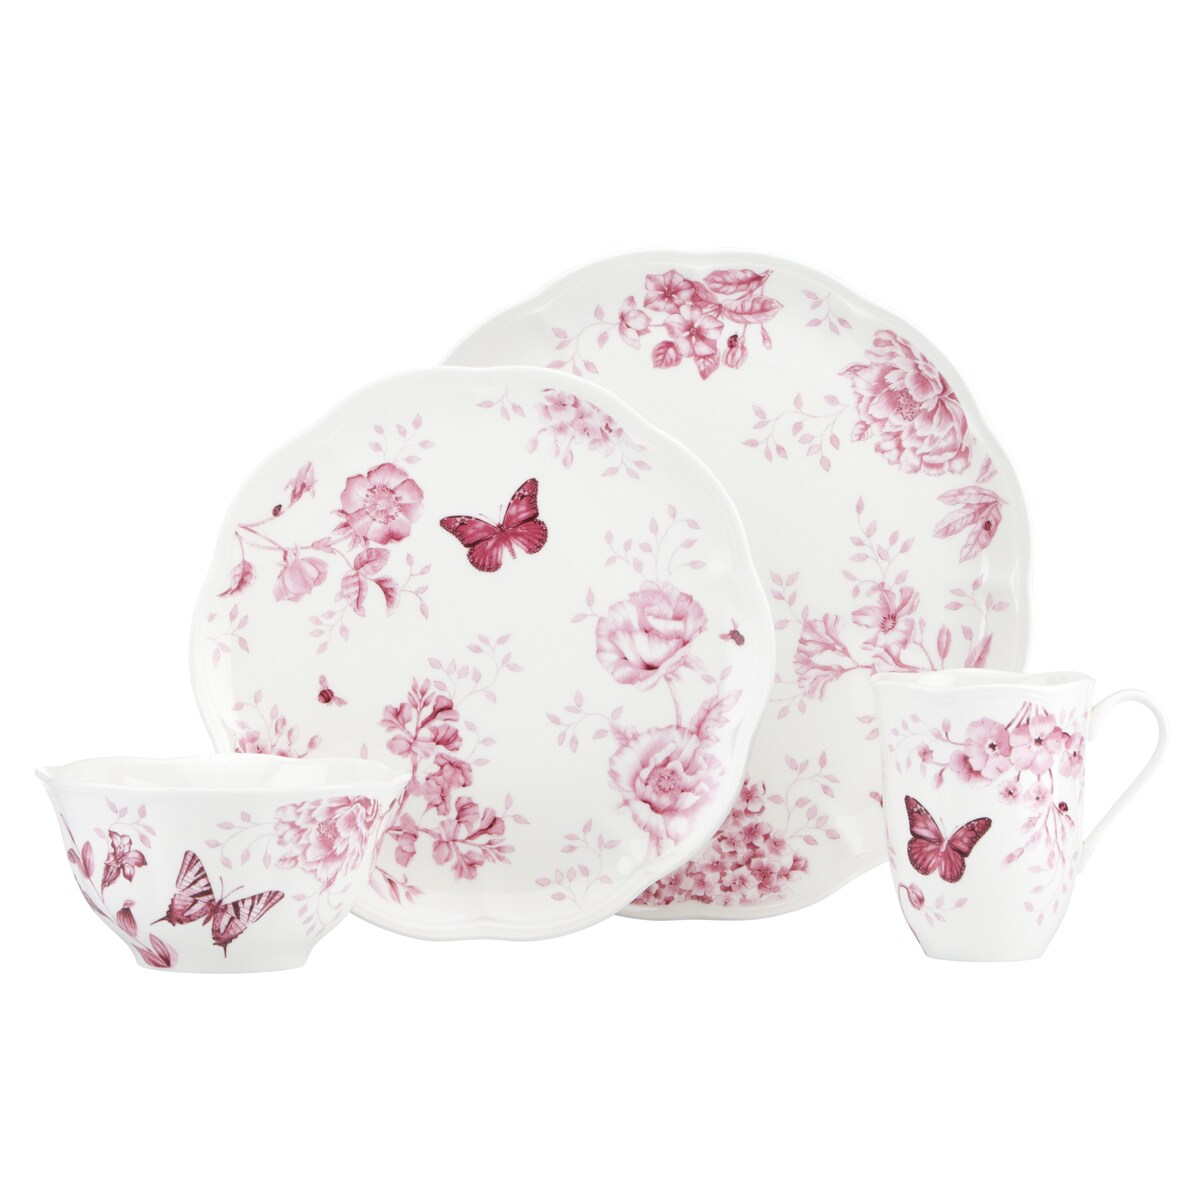 Lenox Butterfly Meadow Toile Pink 4 piece Place Setting